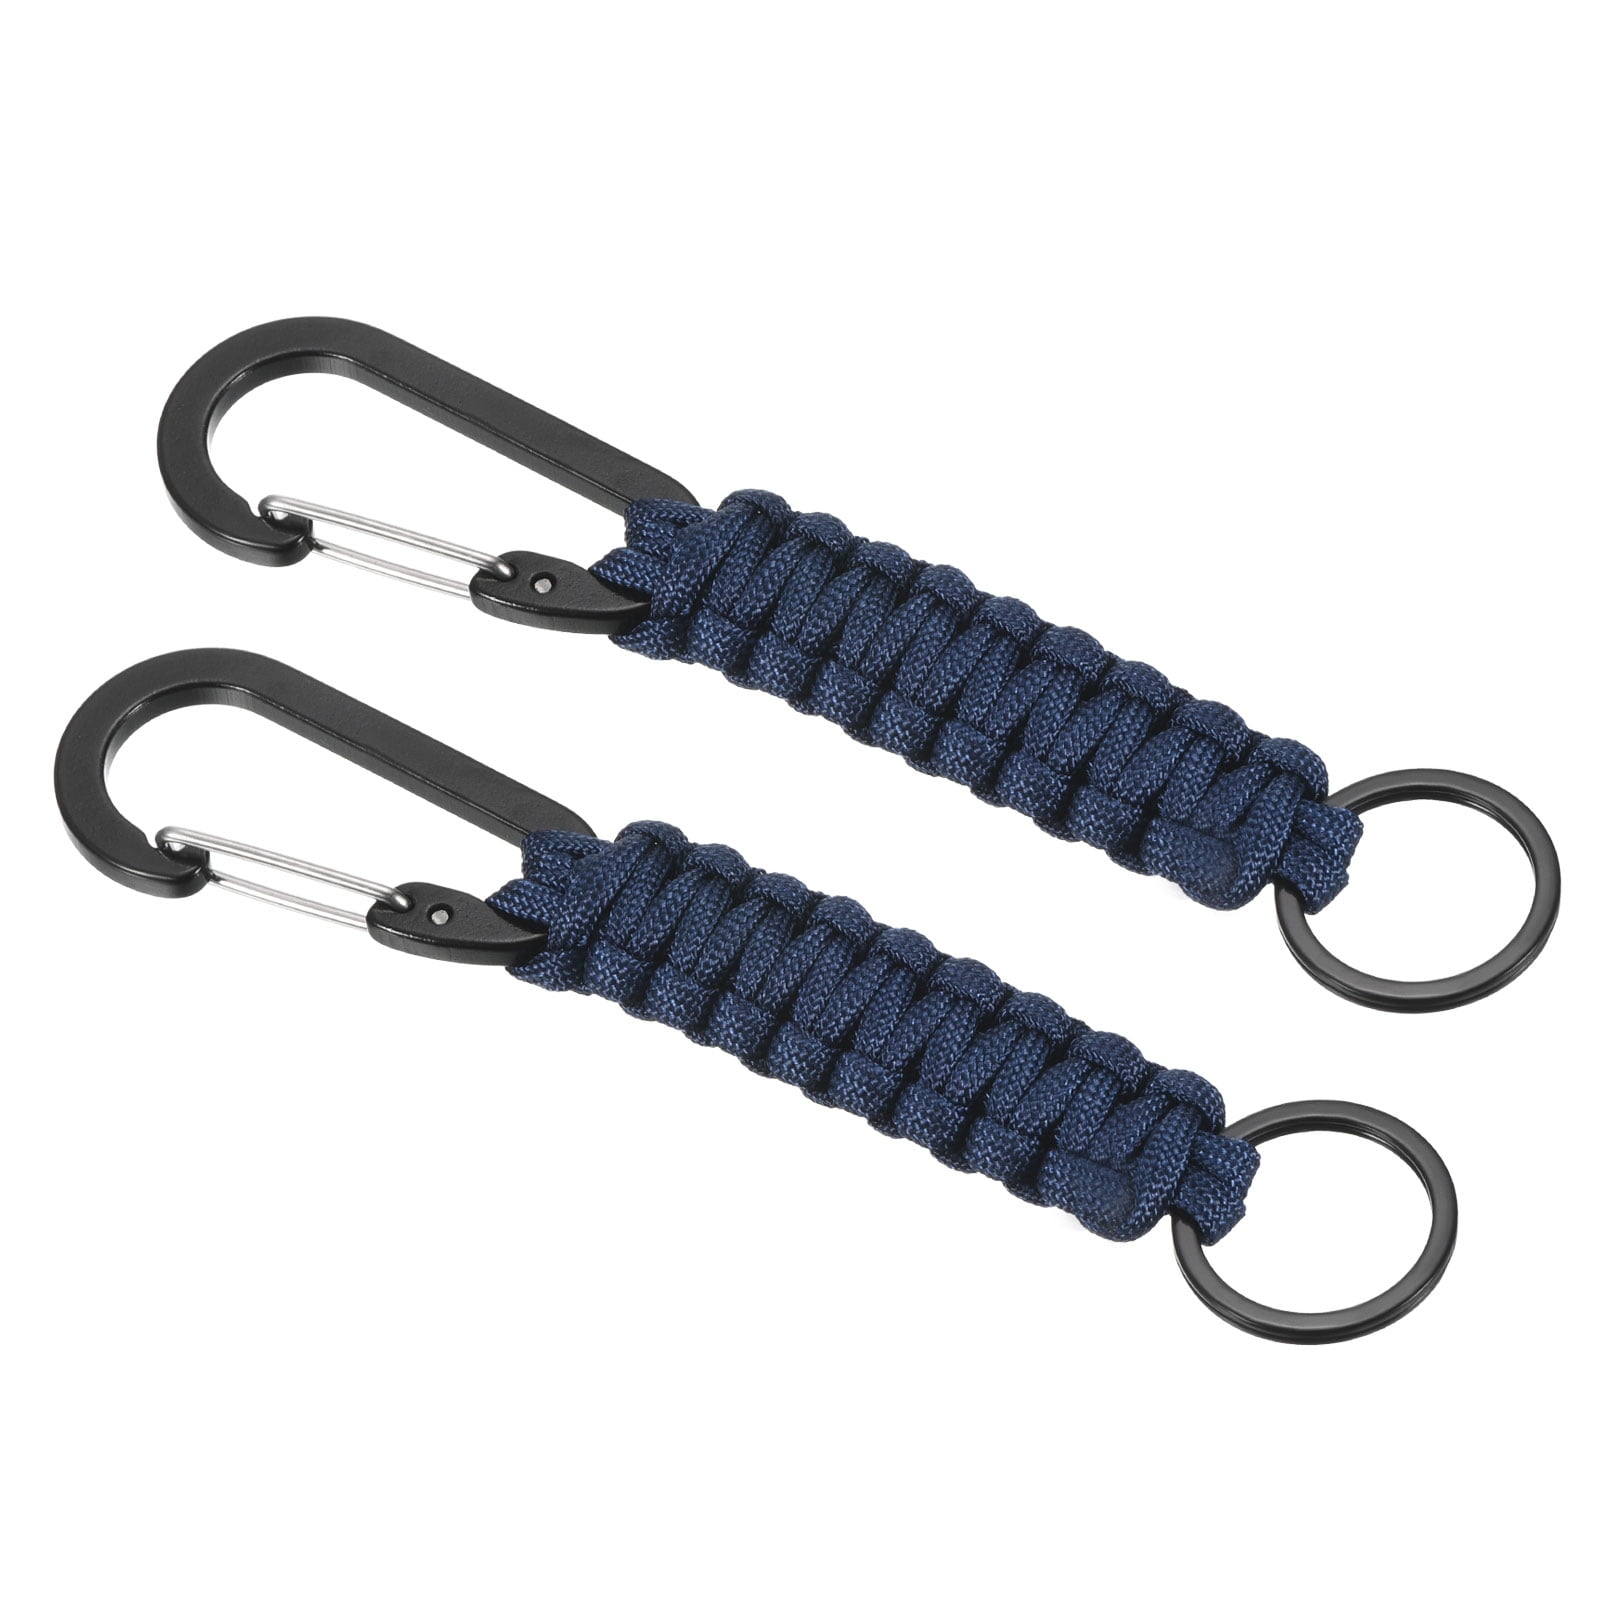 Paracord Brass Beads Keychain Set For DIY Second Hand Hiking Equipment, And  Sports Entertainment From Sport_11, $8.98